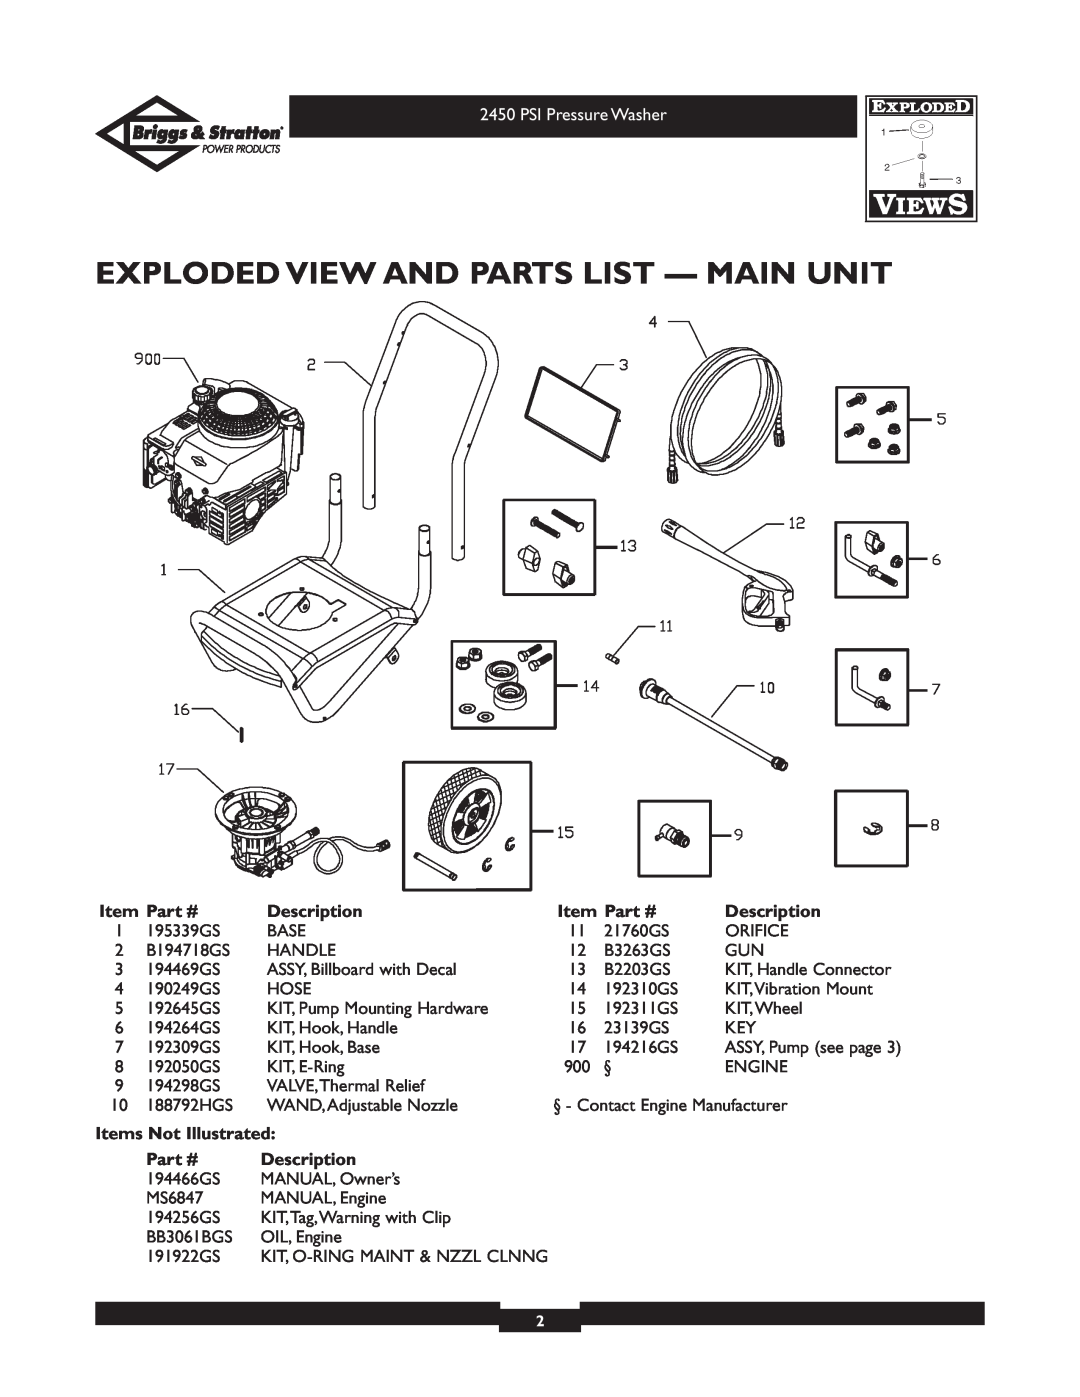 Briggs & Stratton 020215 Exploded View And Parts List - Main Unit, PSI Pressure Washer, Description, Items Not Illustrated 